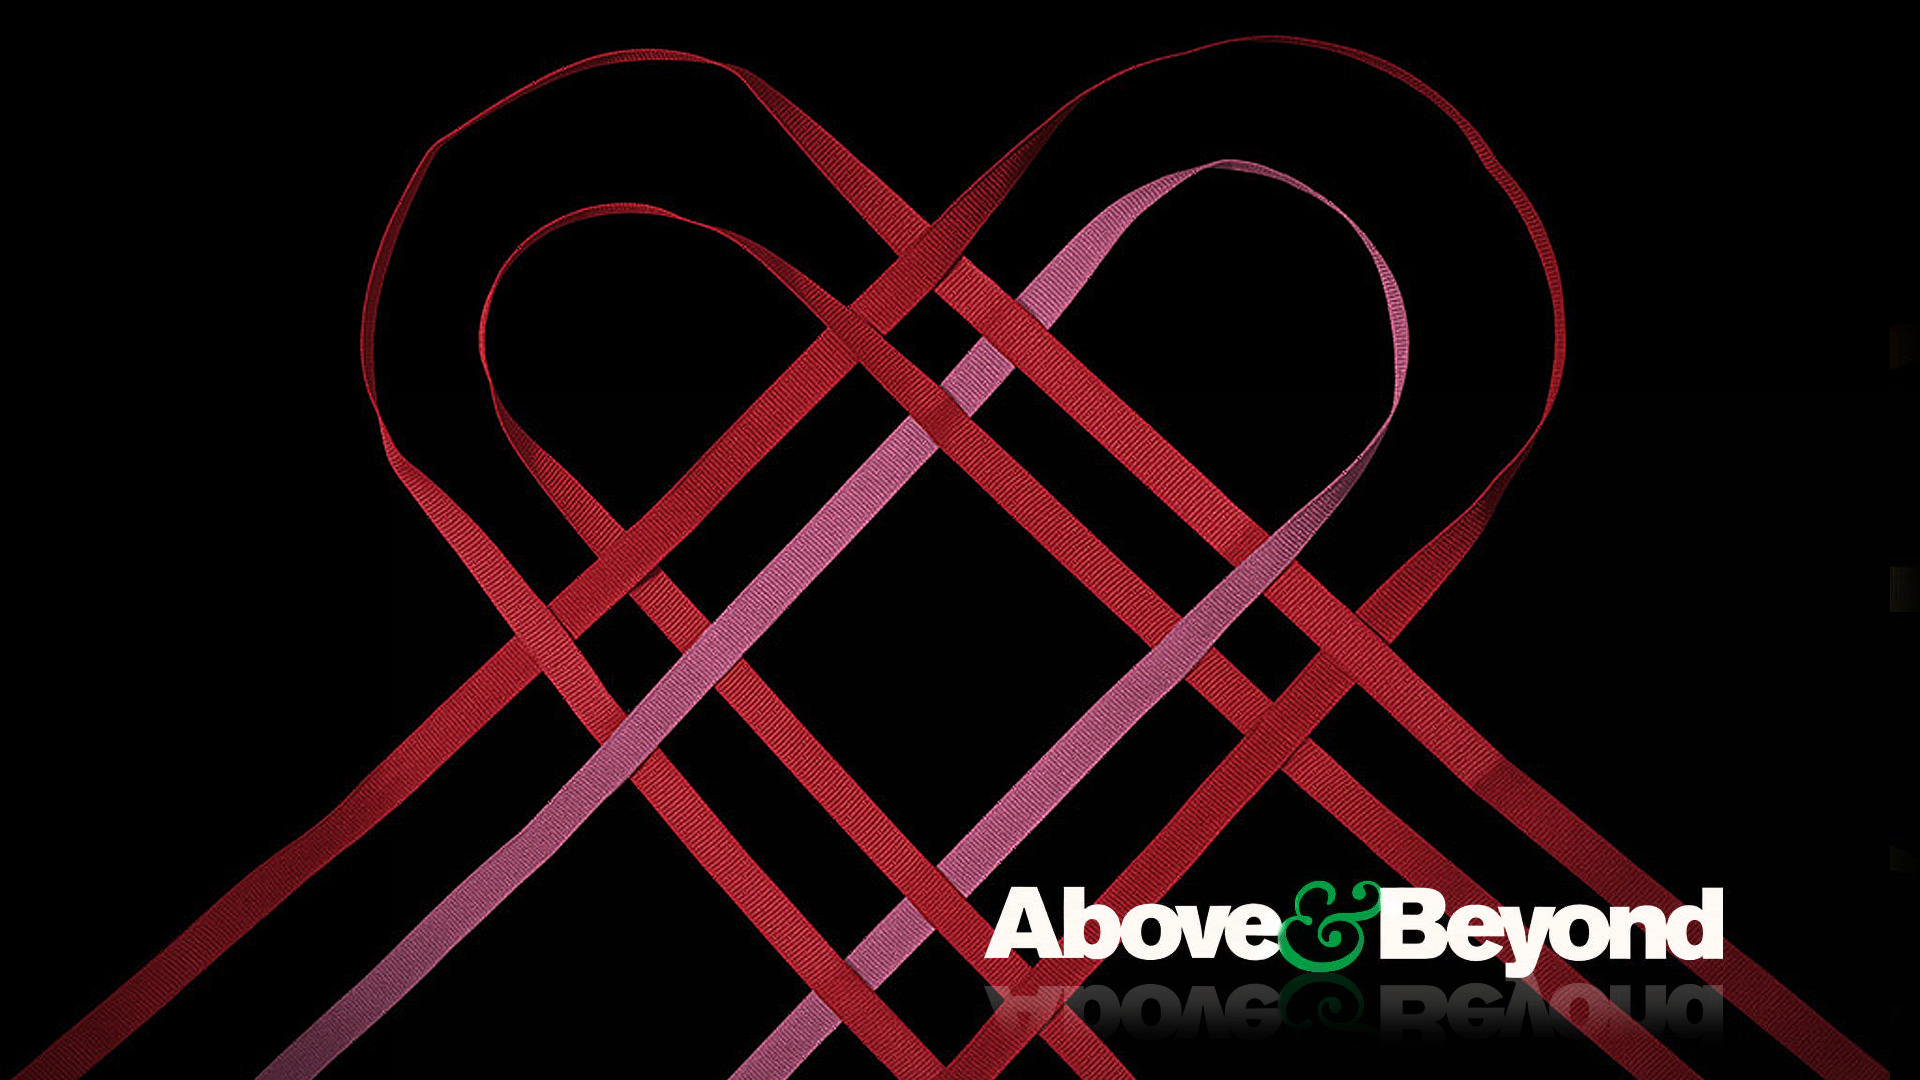 above and beyond wallpaper,heart,font,graphics,graphic design,logo